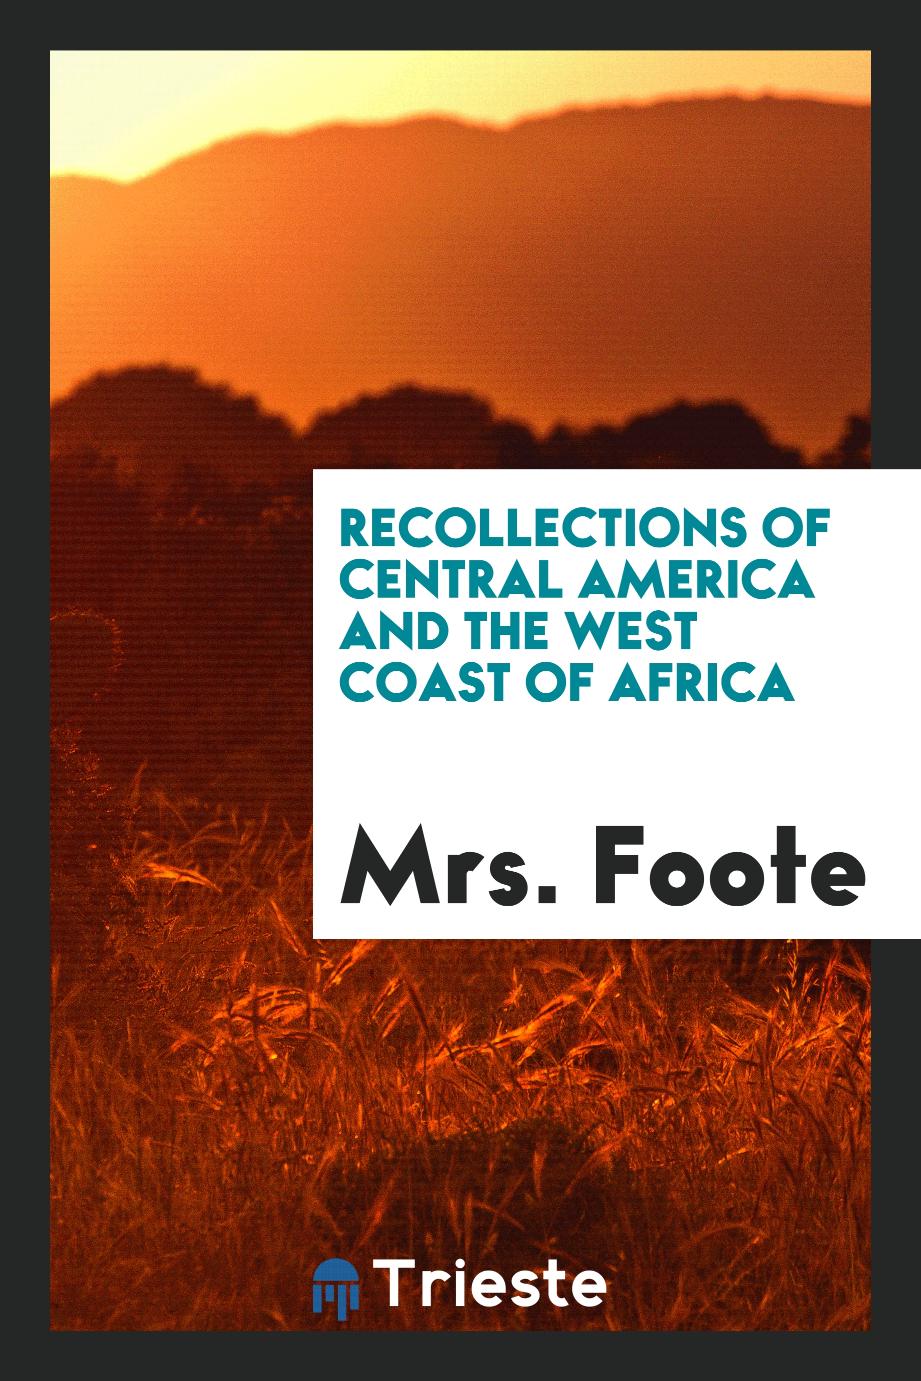 Recollections of Central America and the west coast of Africa